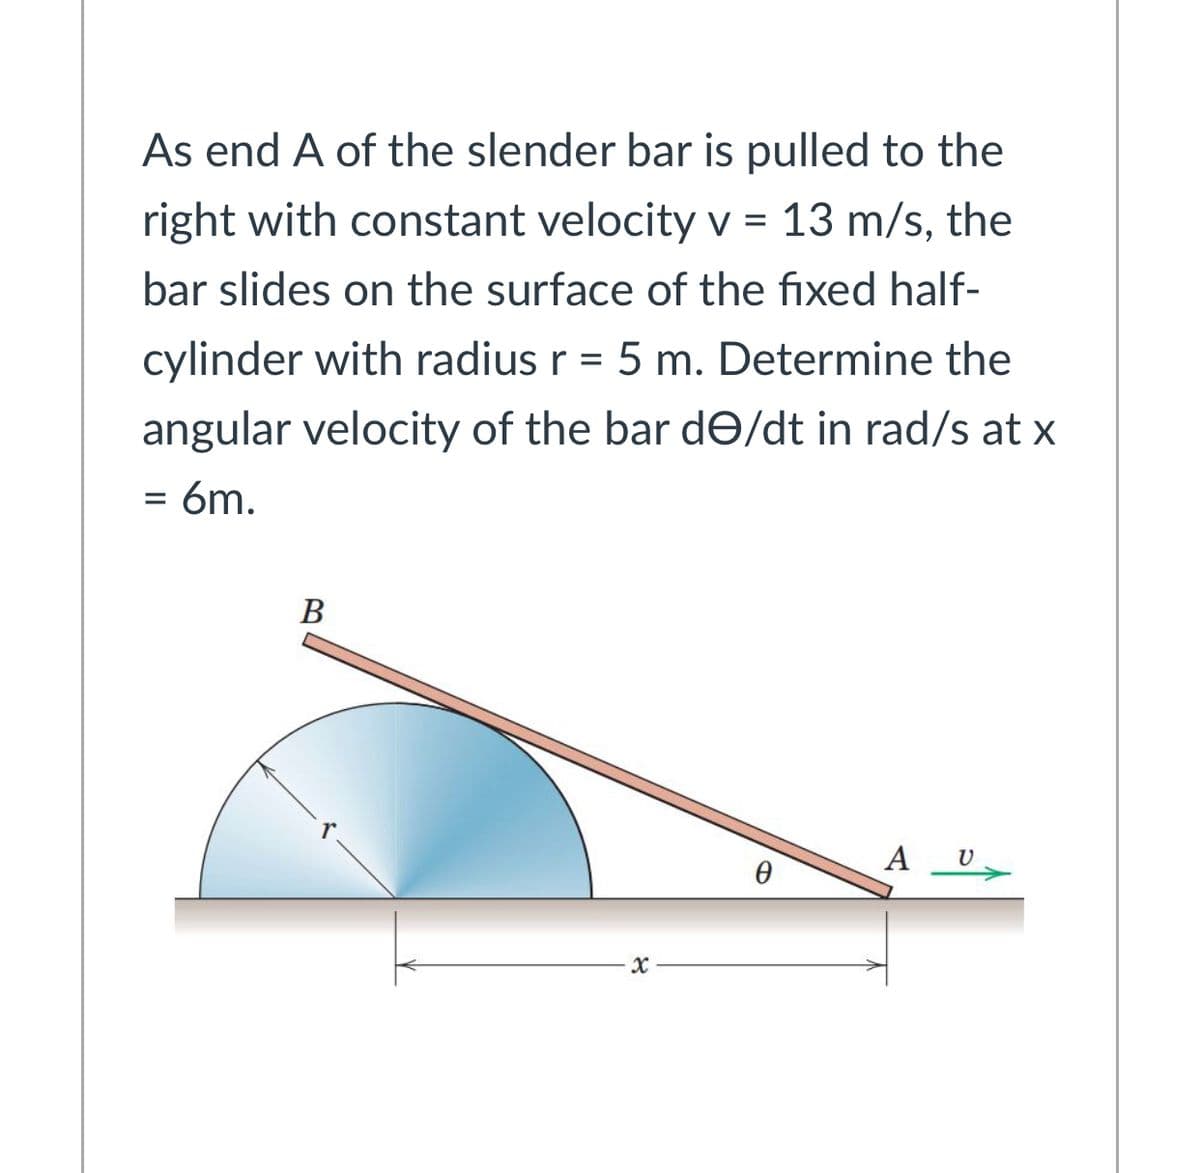 As end A of the slender bar is pulled to the
right with constant velocity v = 13 m/s, the
bar slides on the surface of the fixed half-
cylinder with radius r = 5 m. Determine the
angular velocity of the bar dƏ/dt in rad/s at x
= 6m.
В
A U
